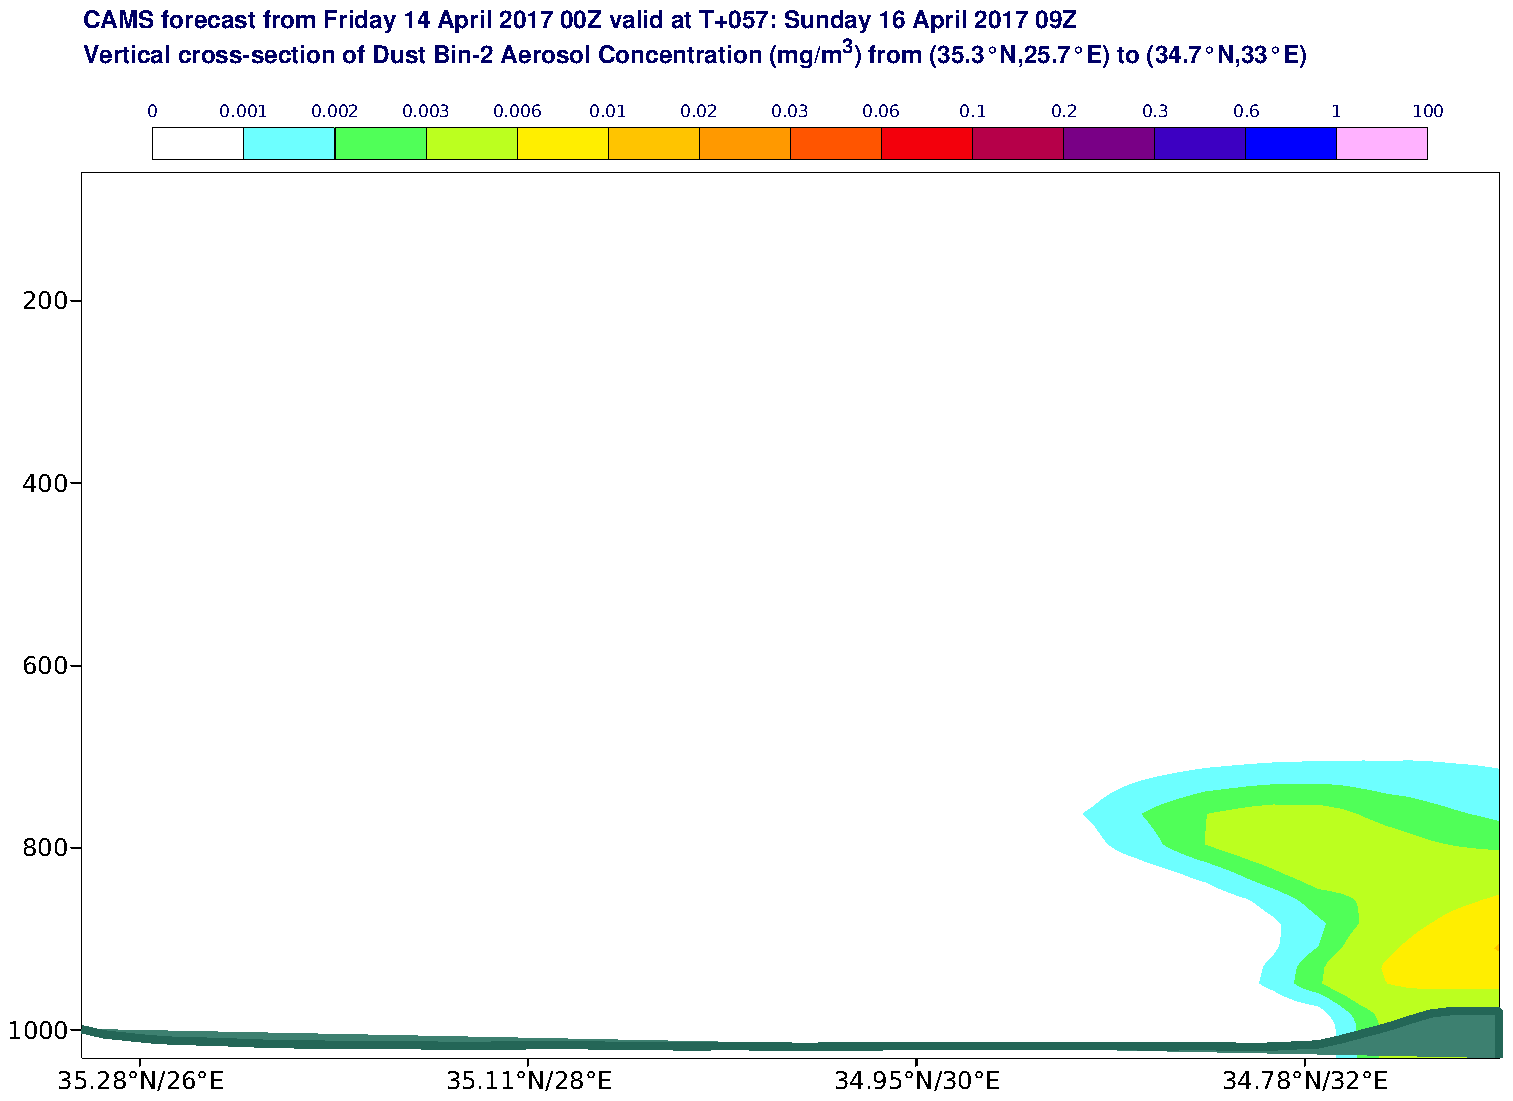 Vertical cross-section of Dust Bin-2 Aerosol Concentration (mg/m3) valid at T57 - 2017-04-16 09:00